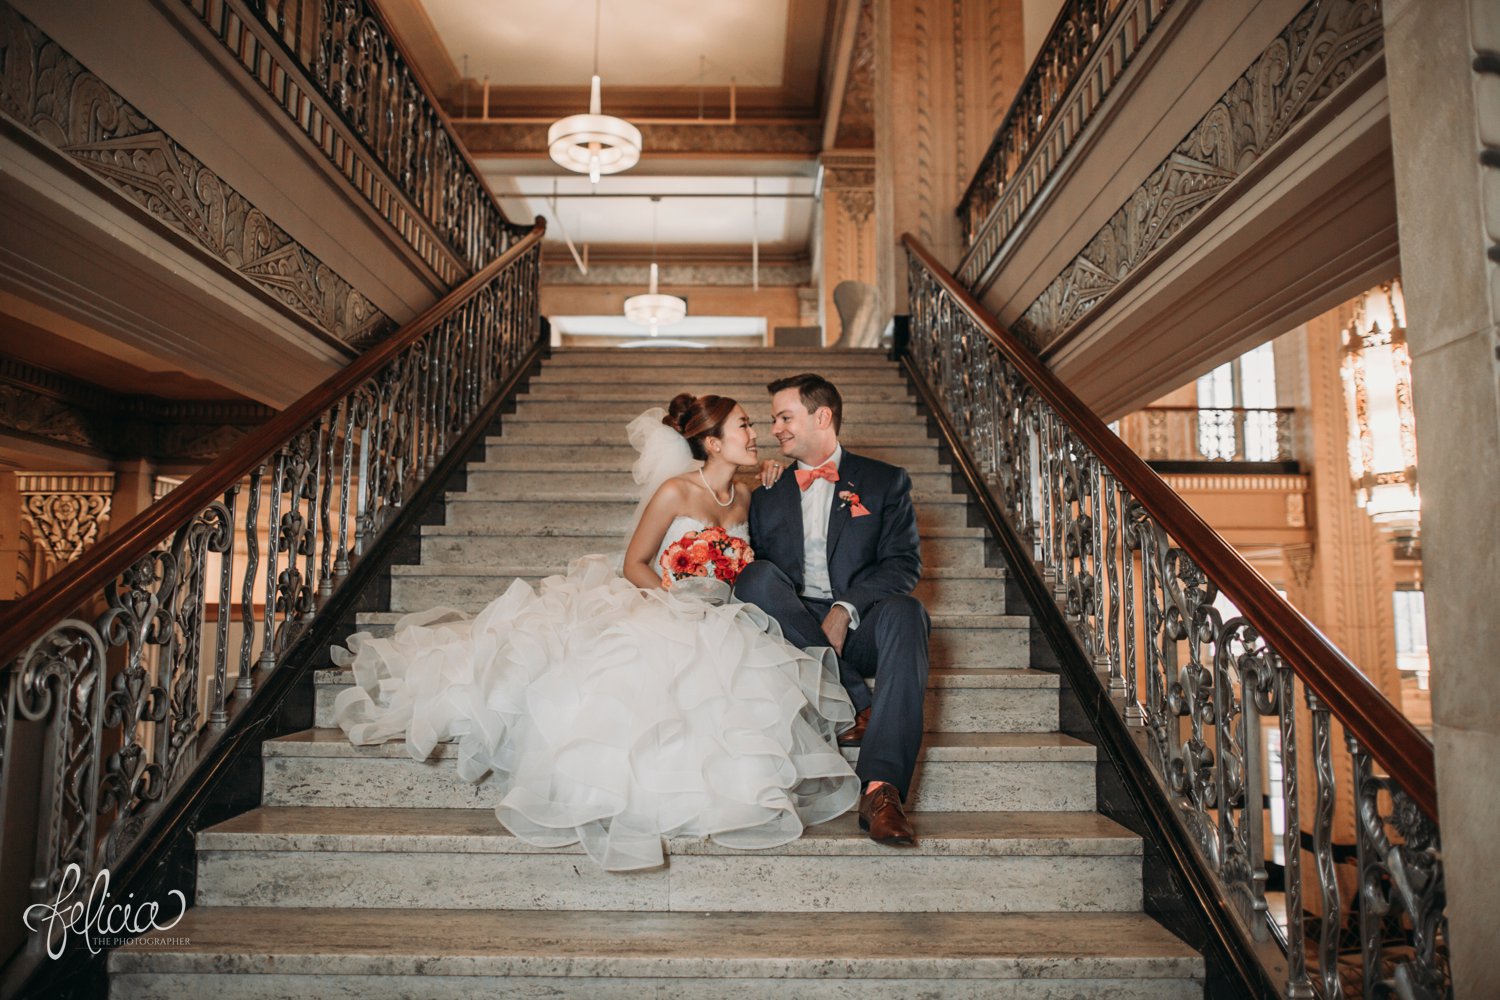 images by feliciathephotographer.com | destination wedding photographer | the grand hall at power and light | kansas city | missouri | downtown | glamorous | multicultural | details | first look | peach | romantic | symmetrical | iron railings | 